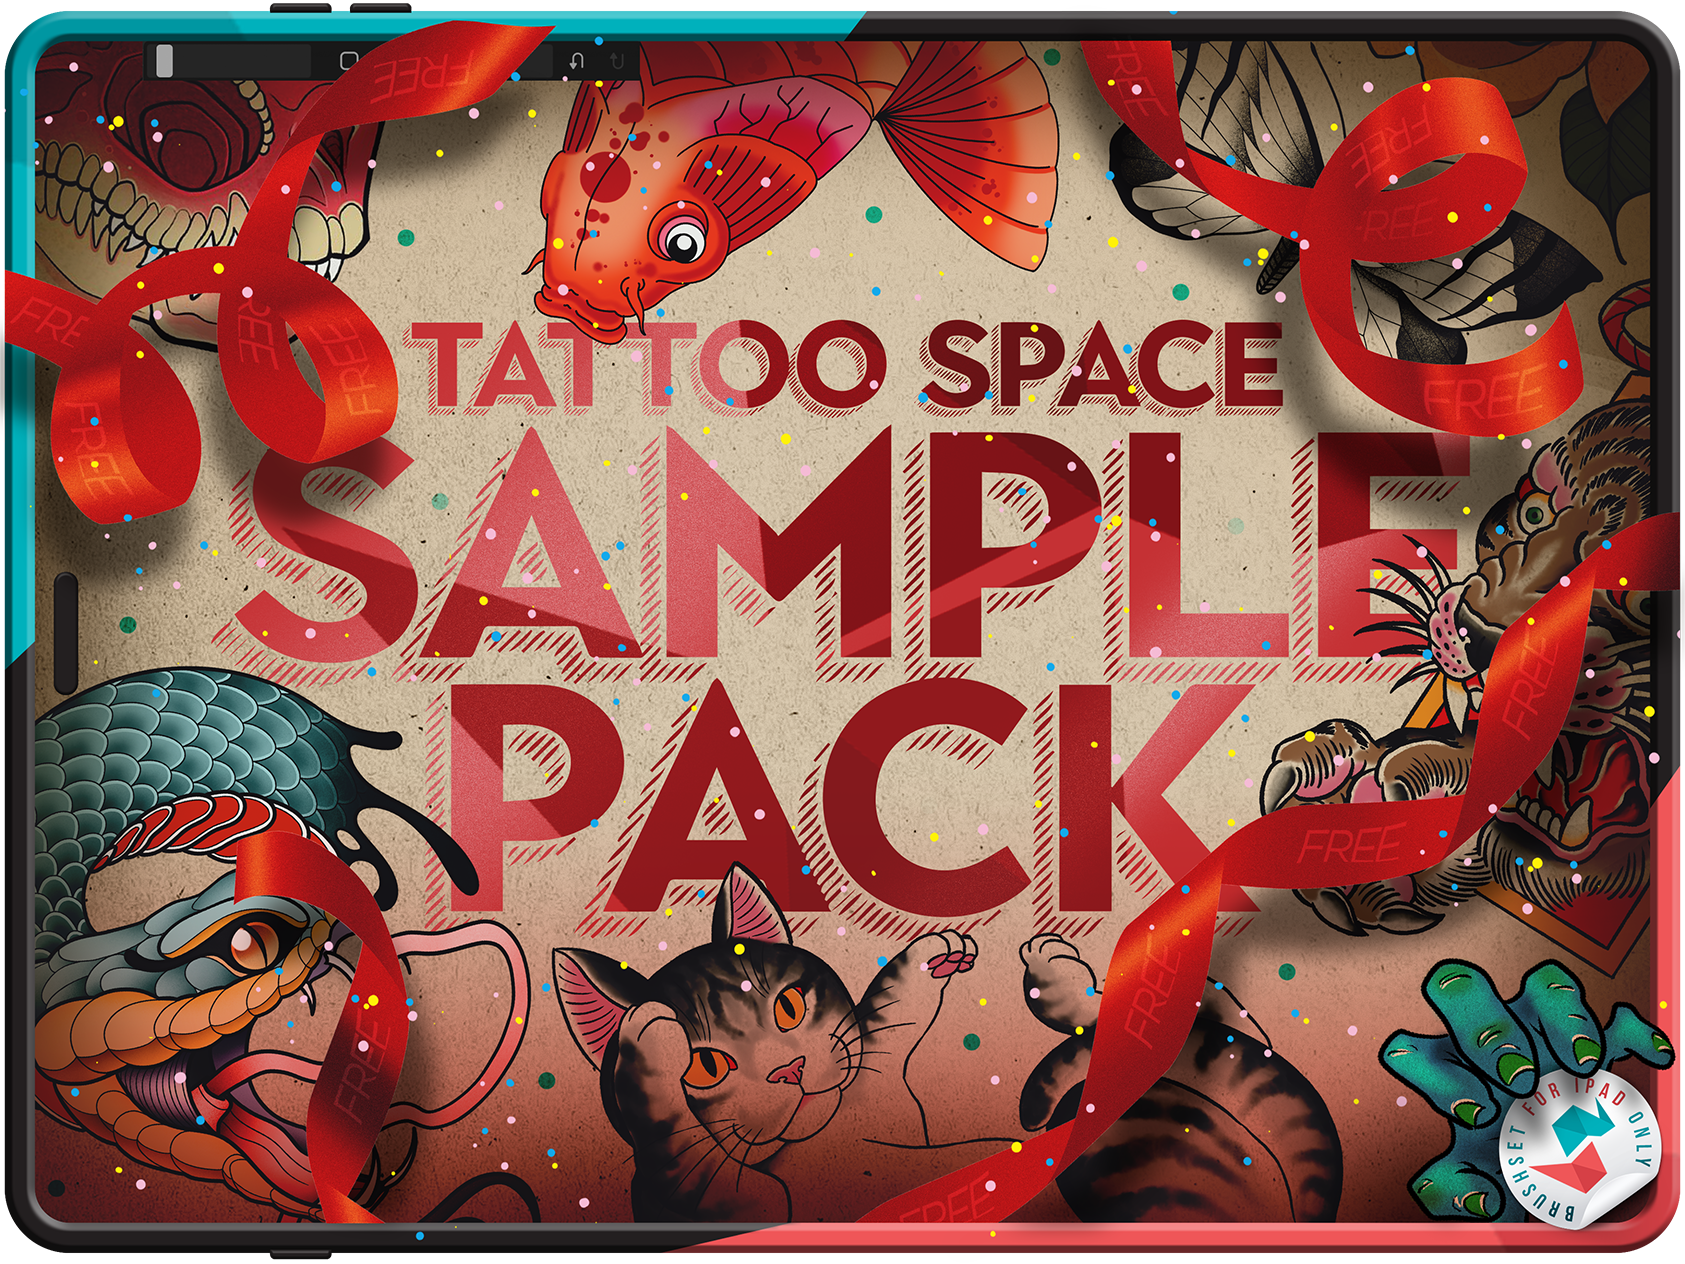 Tattoo collection vectors  free download  Vector free Small star tattoos  Vector graphics design